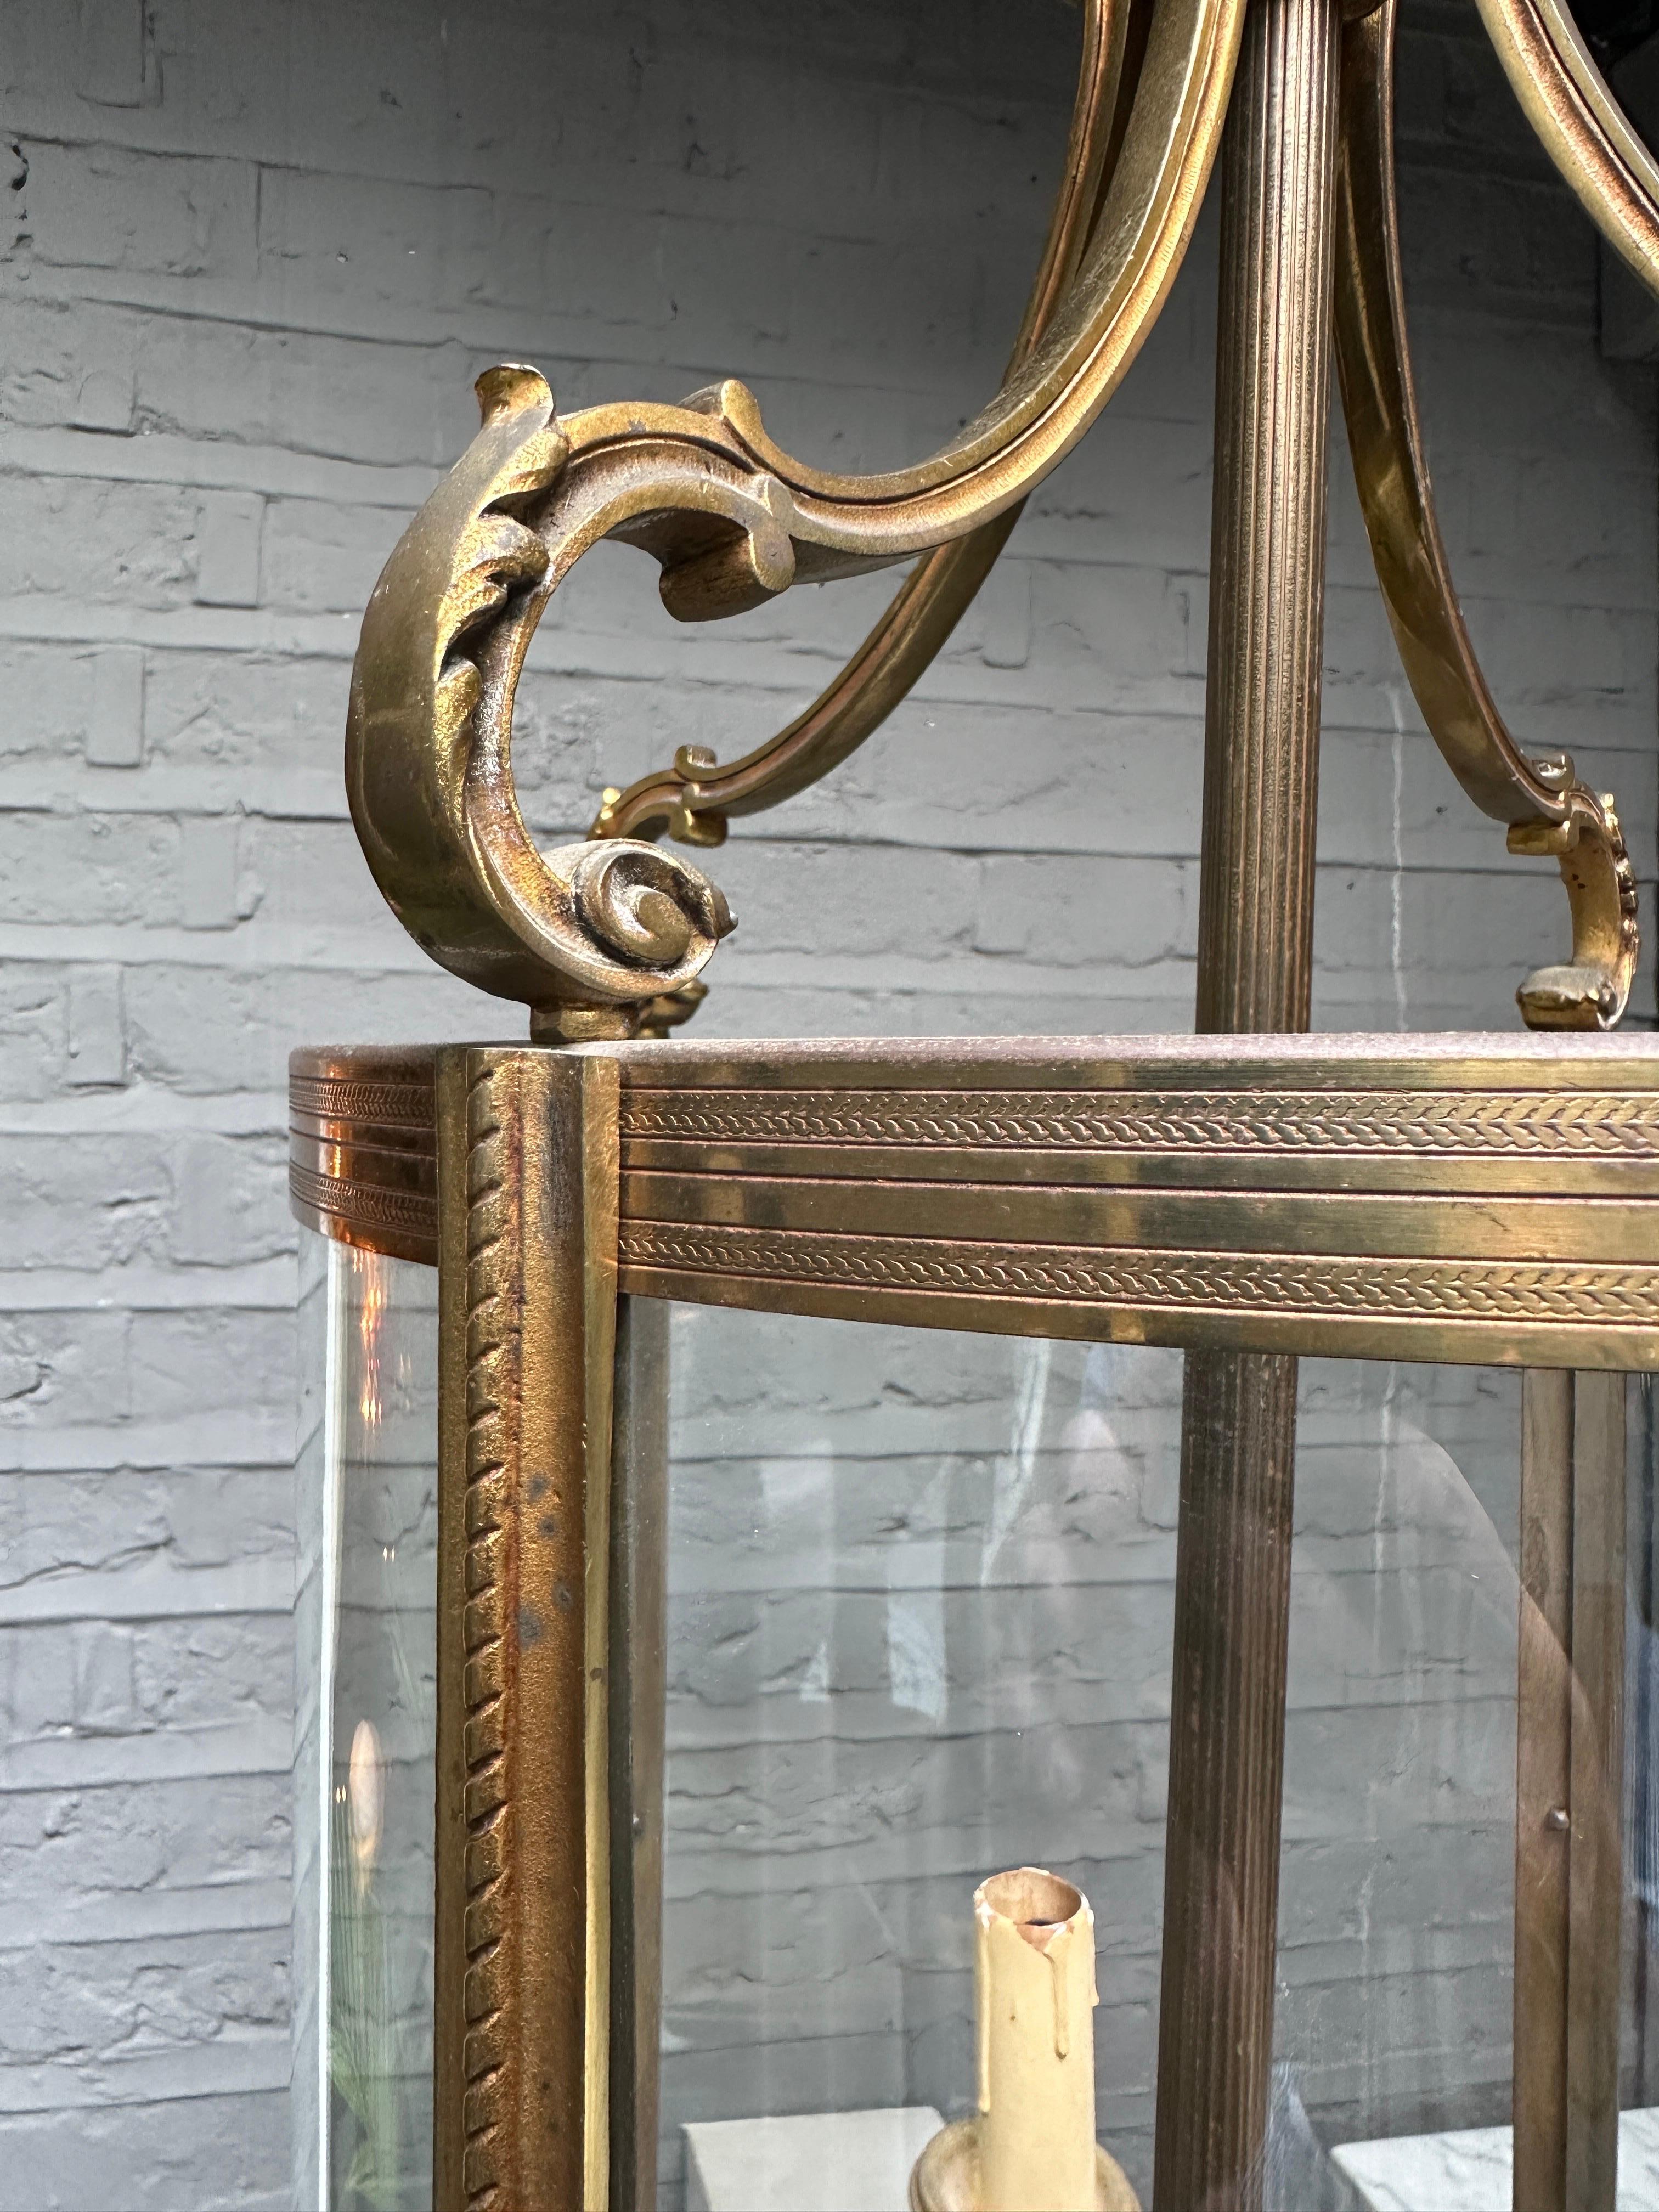 A Gilt bronze late 19th century French lantern. The 4 curved glass panels surrounding a 4 arm branch with reeded stem and scrolled acanthus arms, The centre finished with an acorn finial. The frame of chased bronze work with finials on bottom and